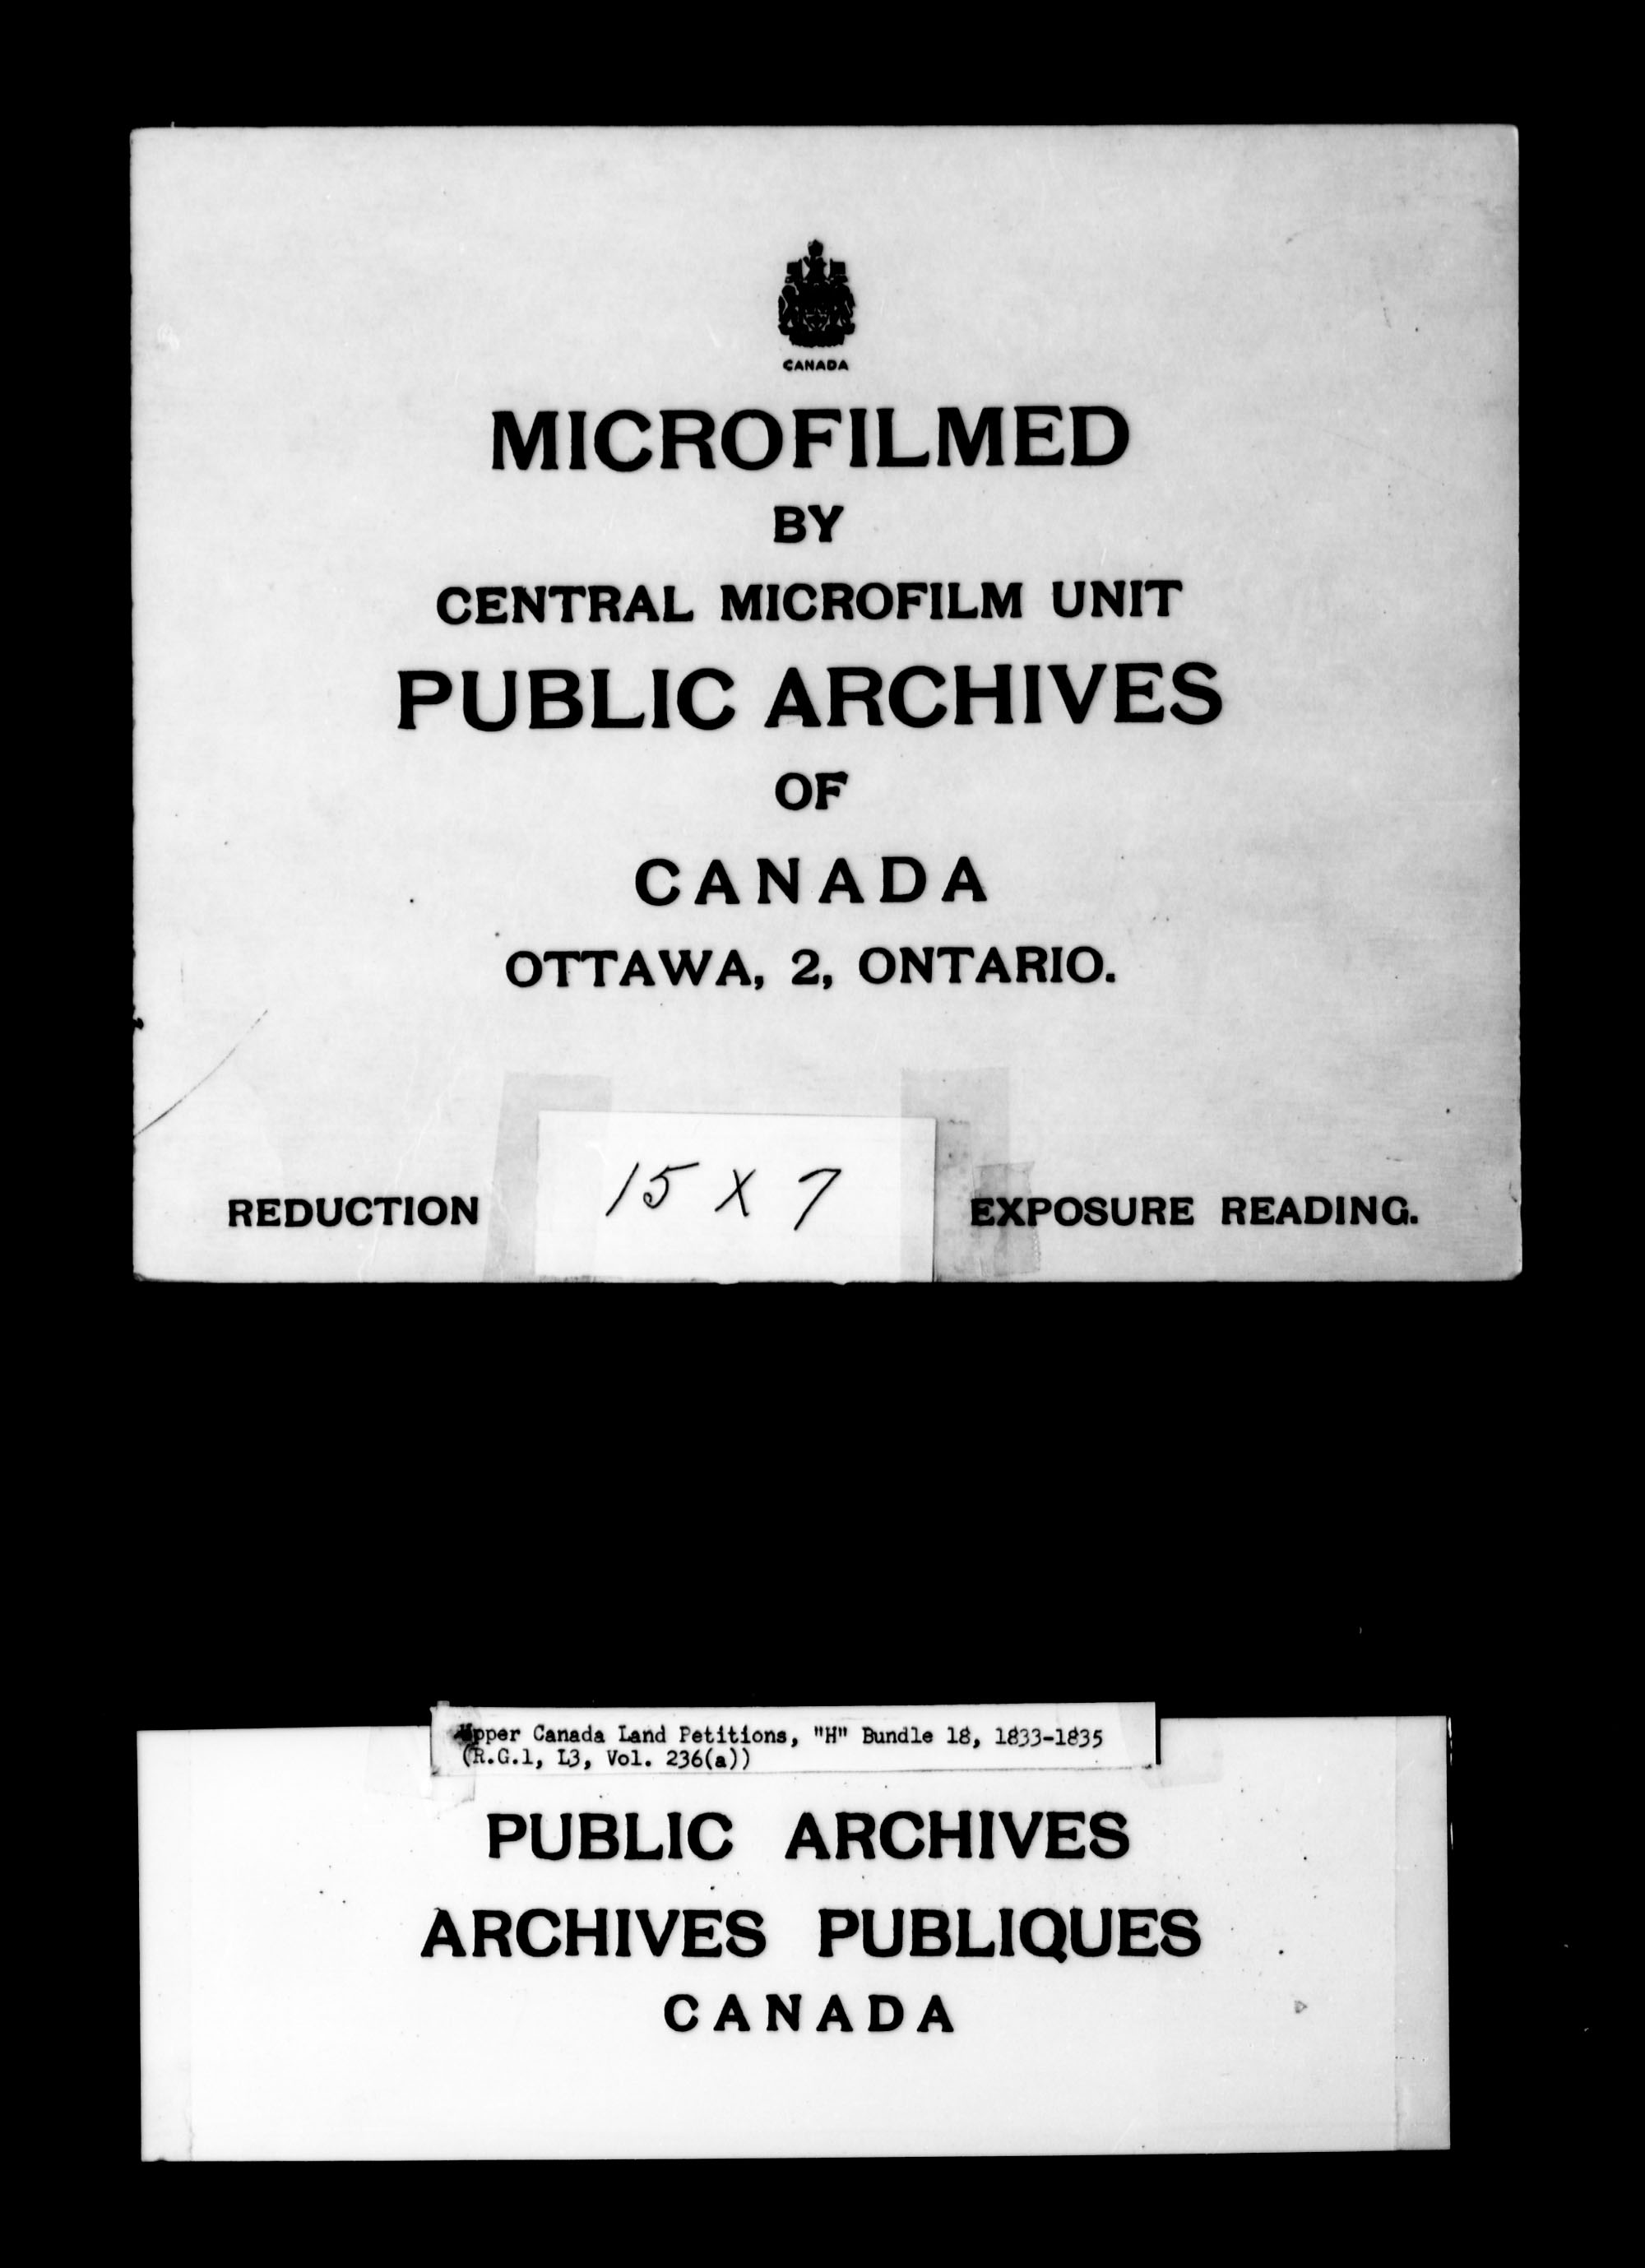 Title: Upper Canada Land Petitions (1763-1865) - Mikan Number: 205131 - Microform: c-2053